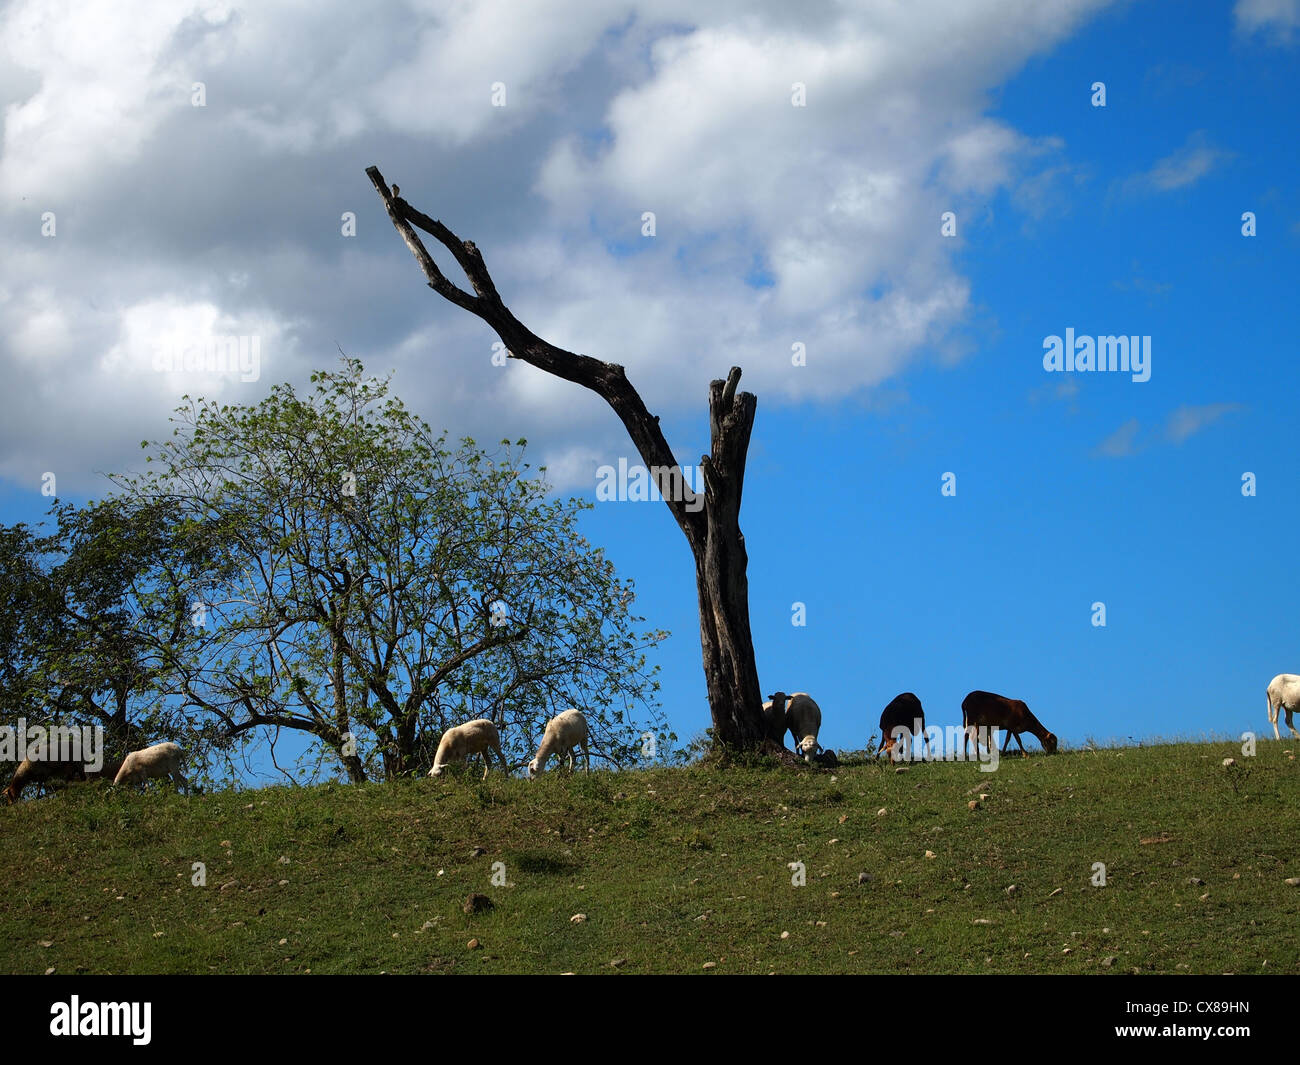 Sheep on a field Stock Photo